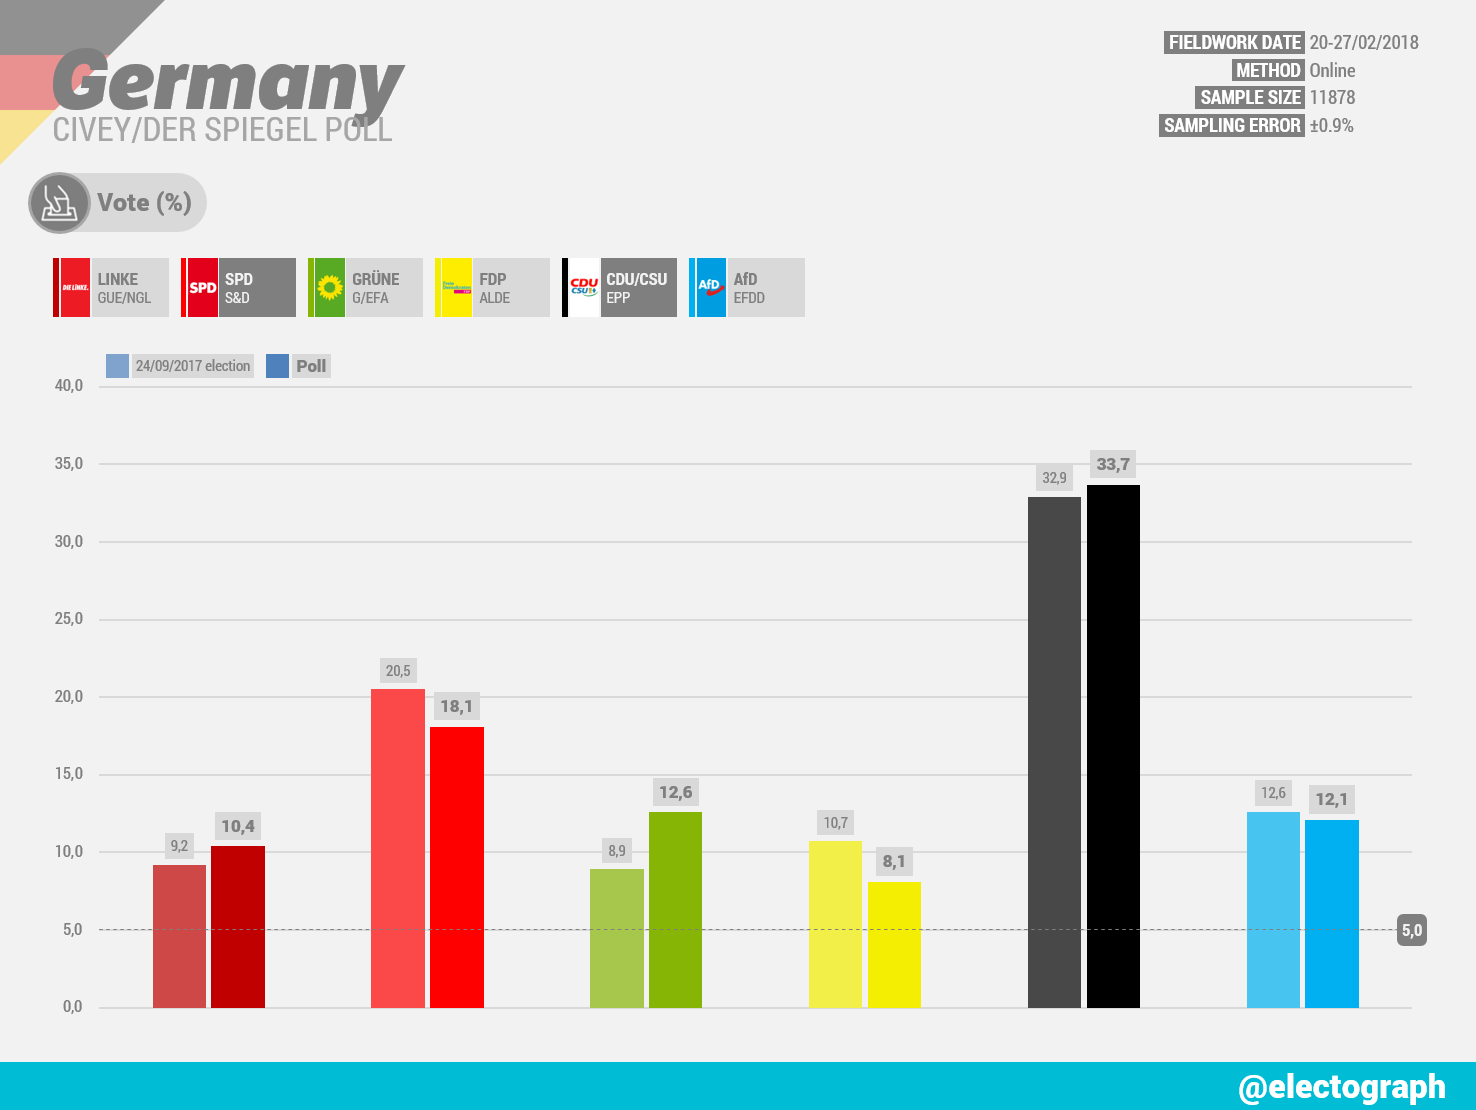 GERMANY Civey poll chart for Der Spiegel, February 2018